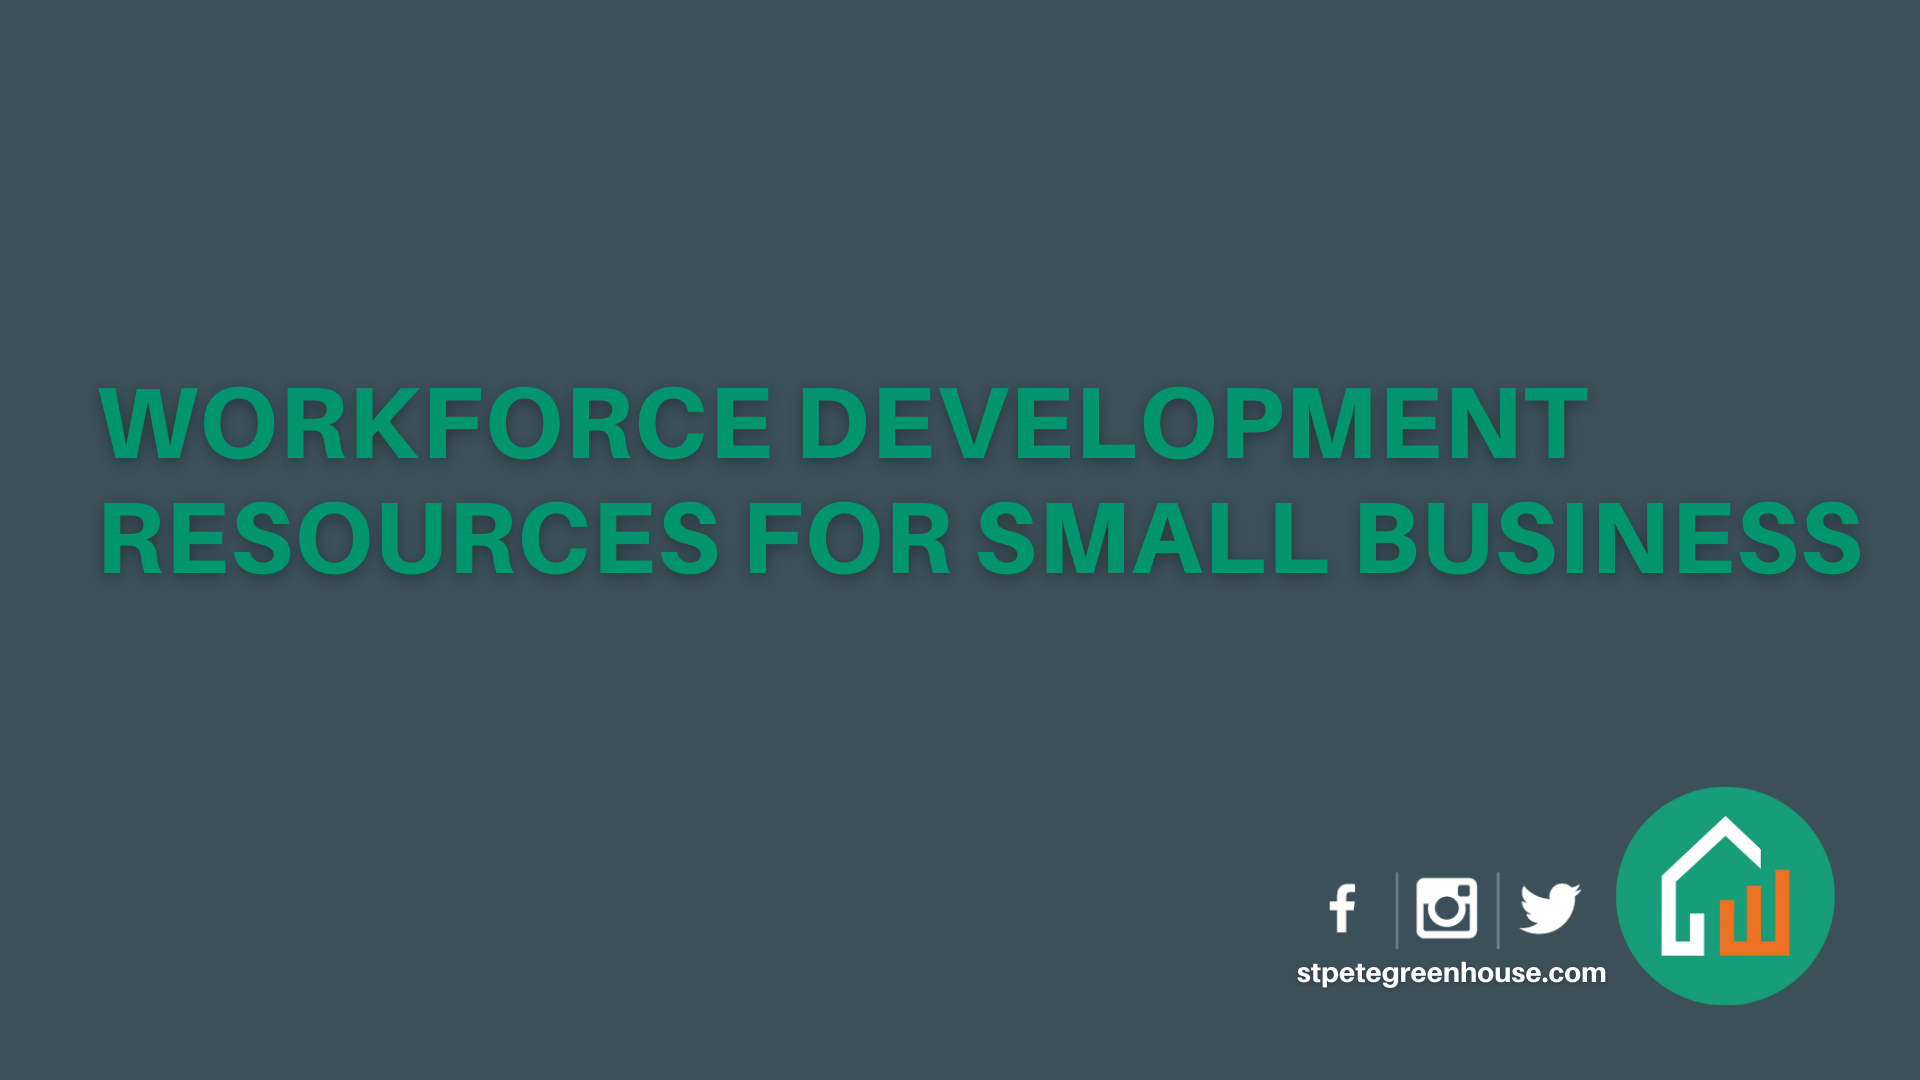 Workforce Development Resources for Small Business main image